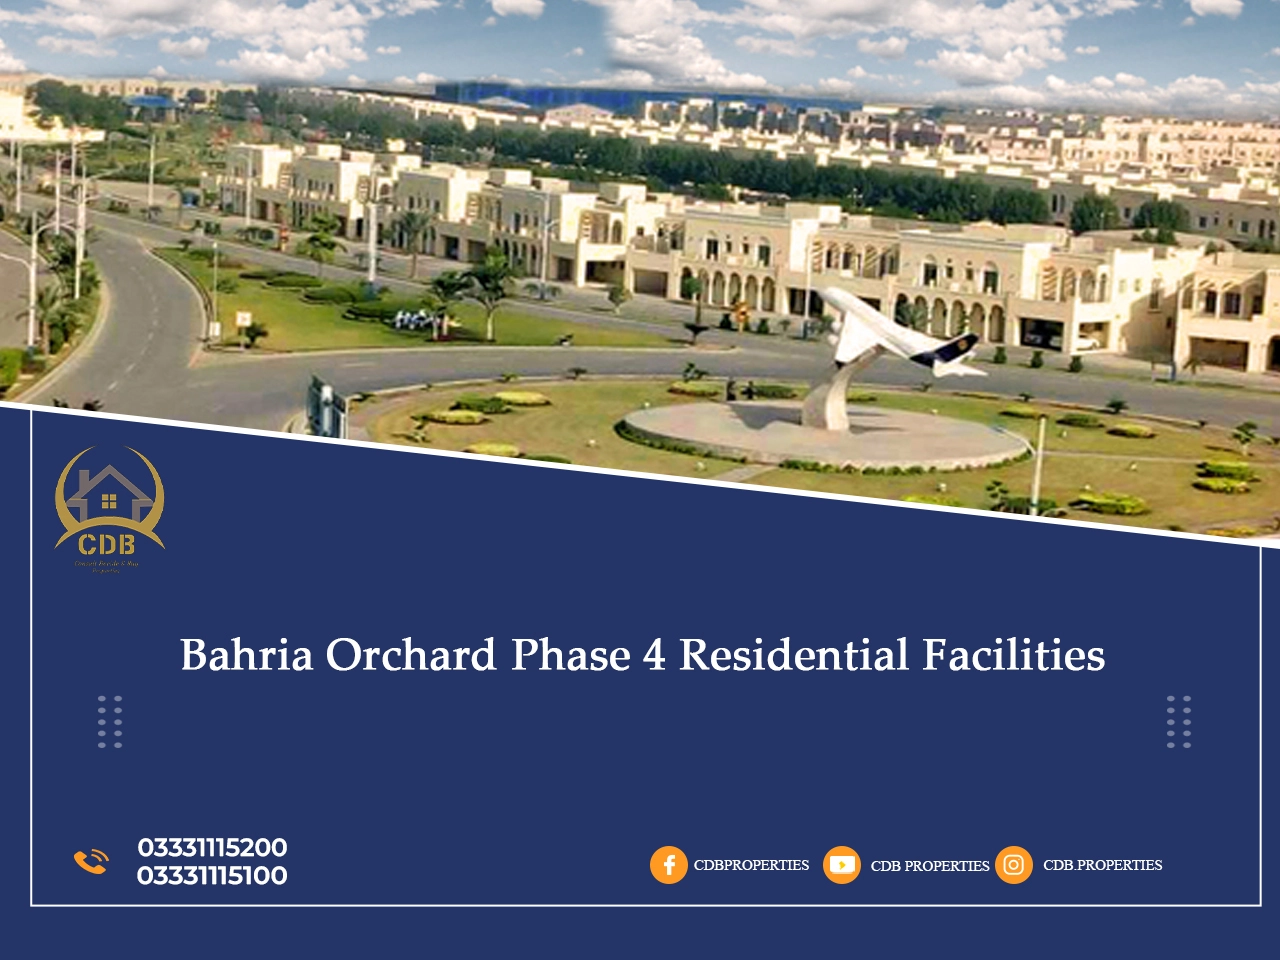 Bahria orchard phase 4 residential facilities